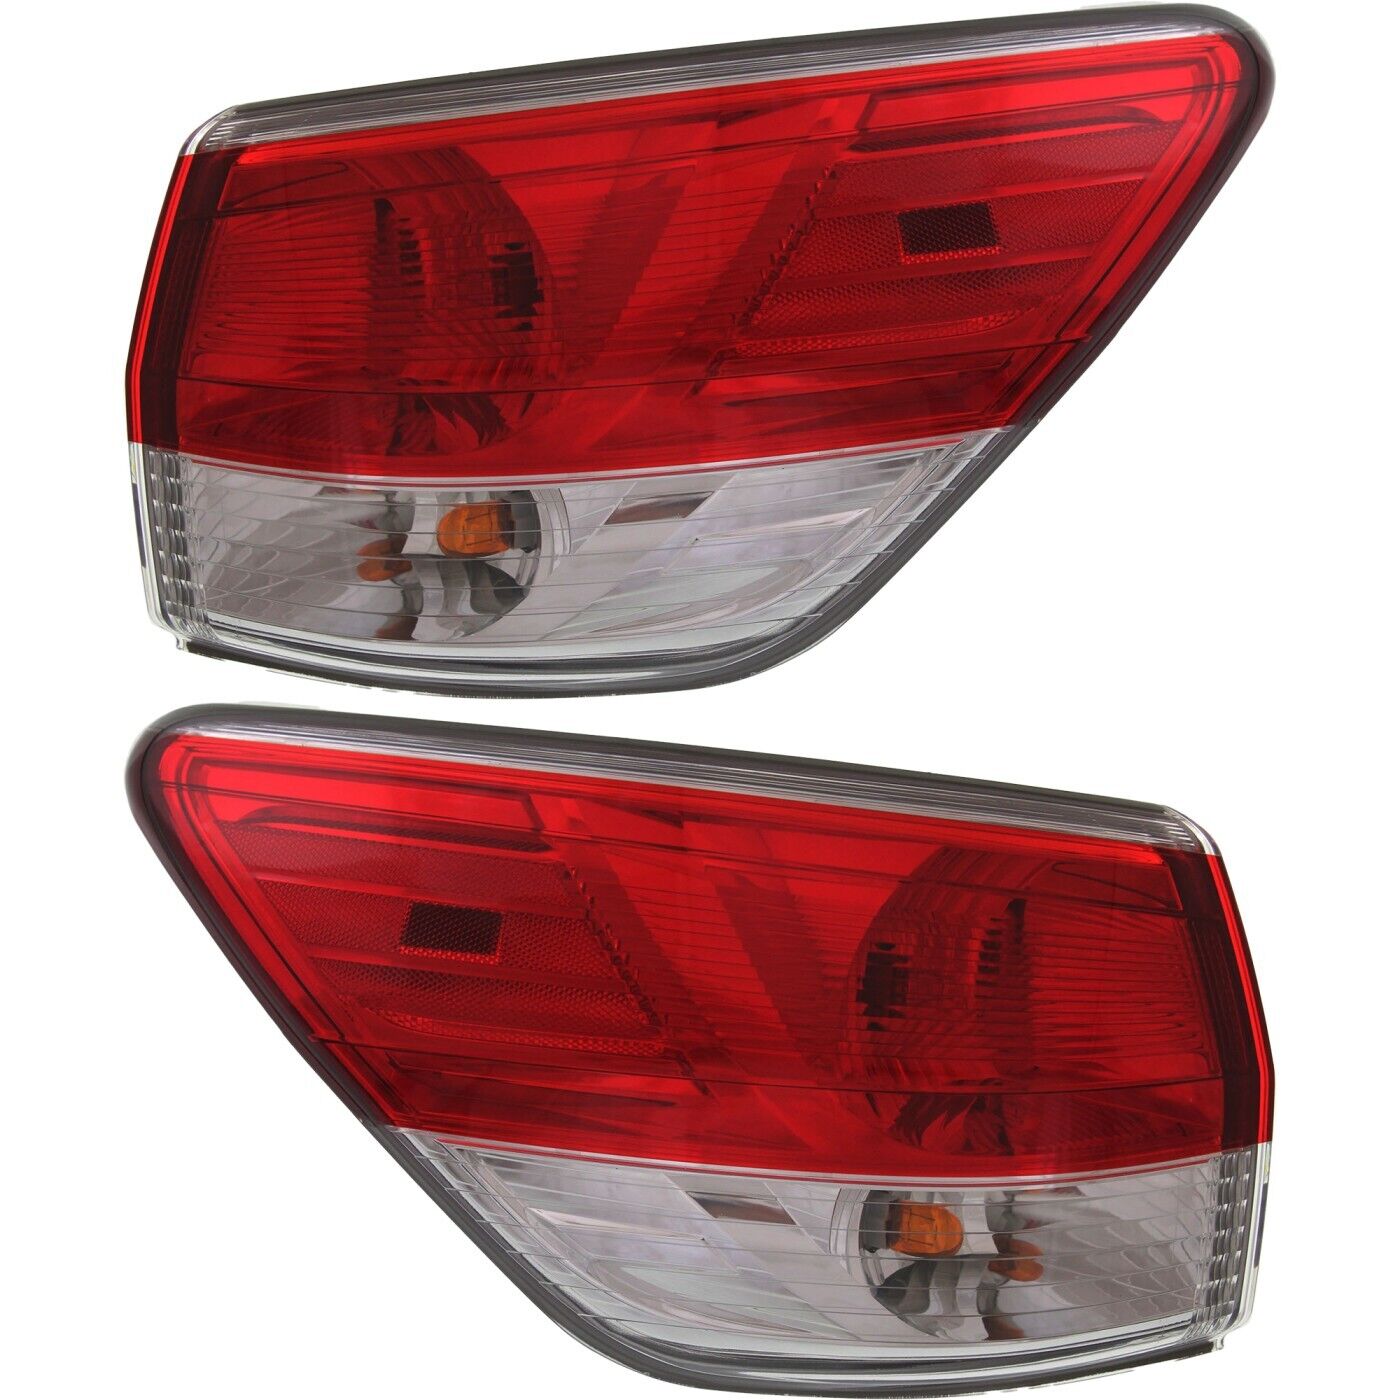 Halogen Tail Light Set For 2013-2017 Nissan Pathfinder Clear/Red w/ Bulbs 2Pcs